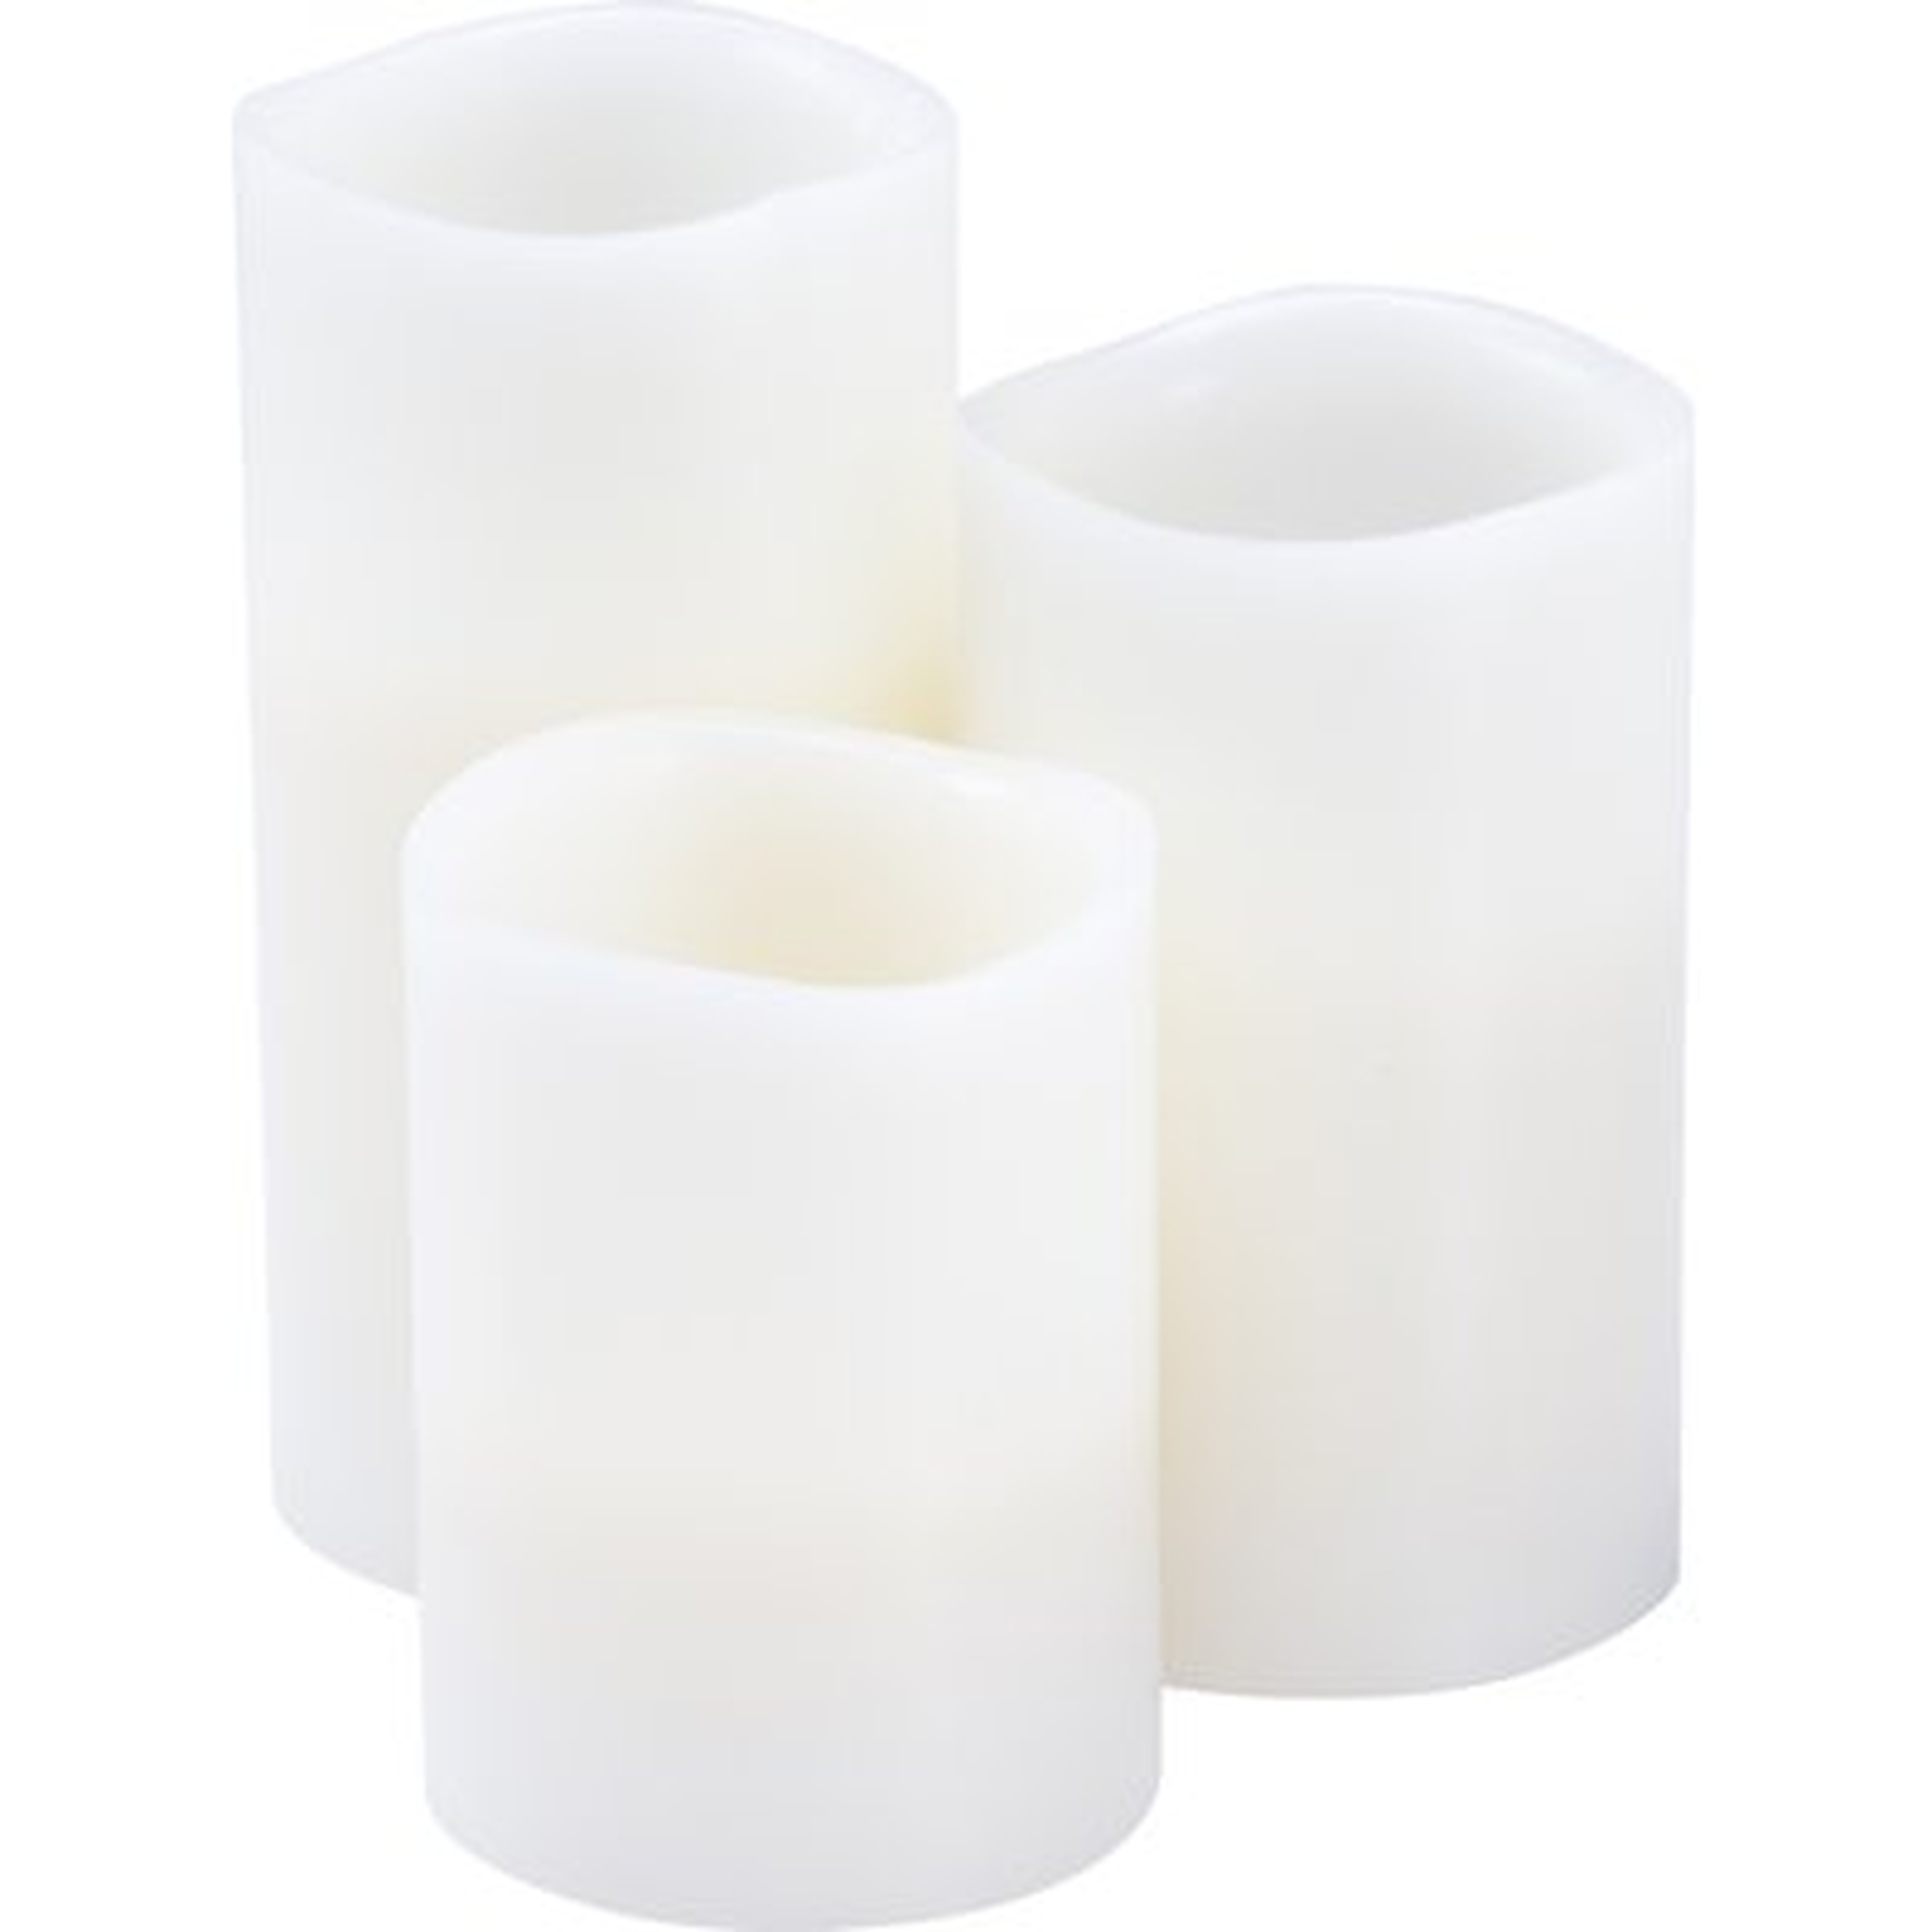 3 Piece Scented Flameless Candle Set - Birch Lane